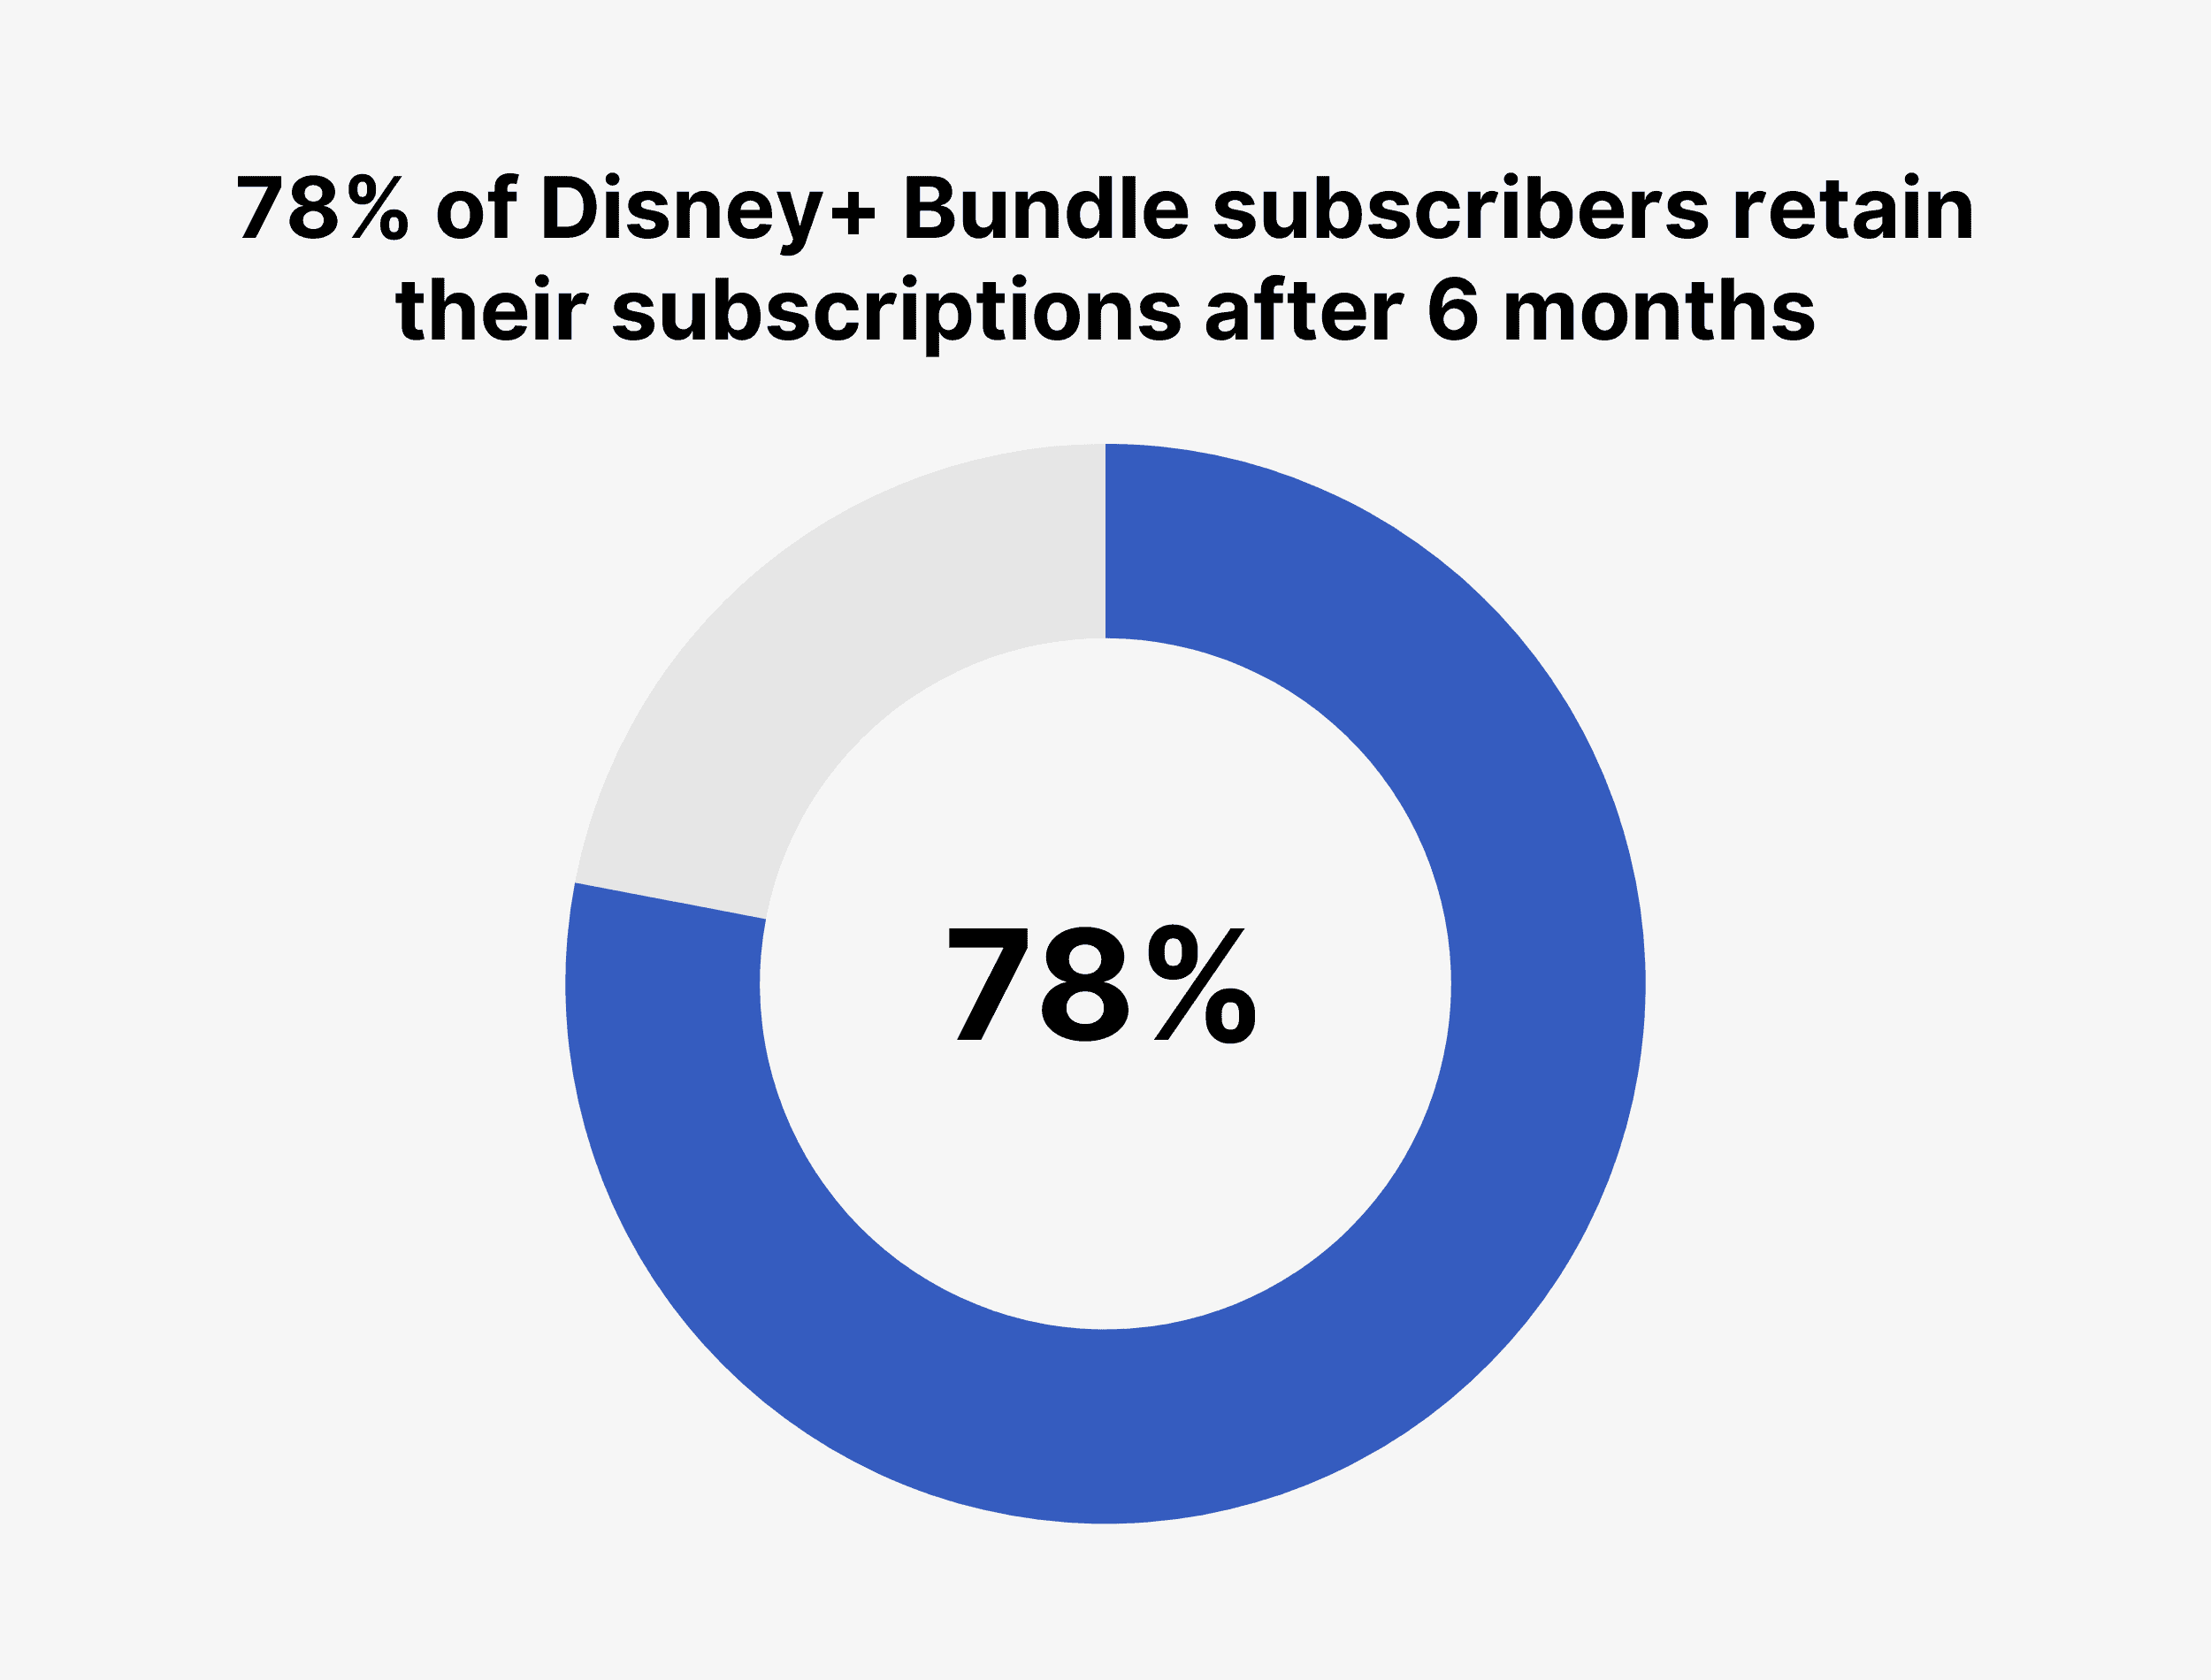 78% of Disney+ Bundle subscribers retain their subscriptions after 6 months